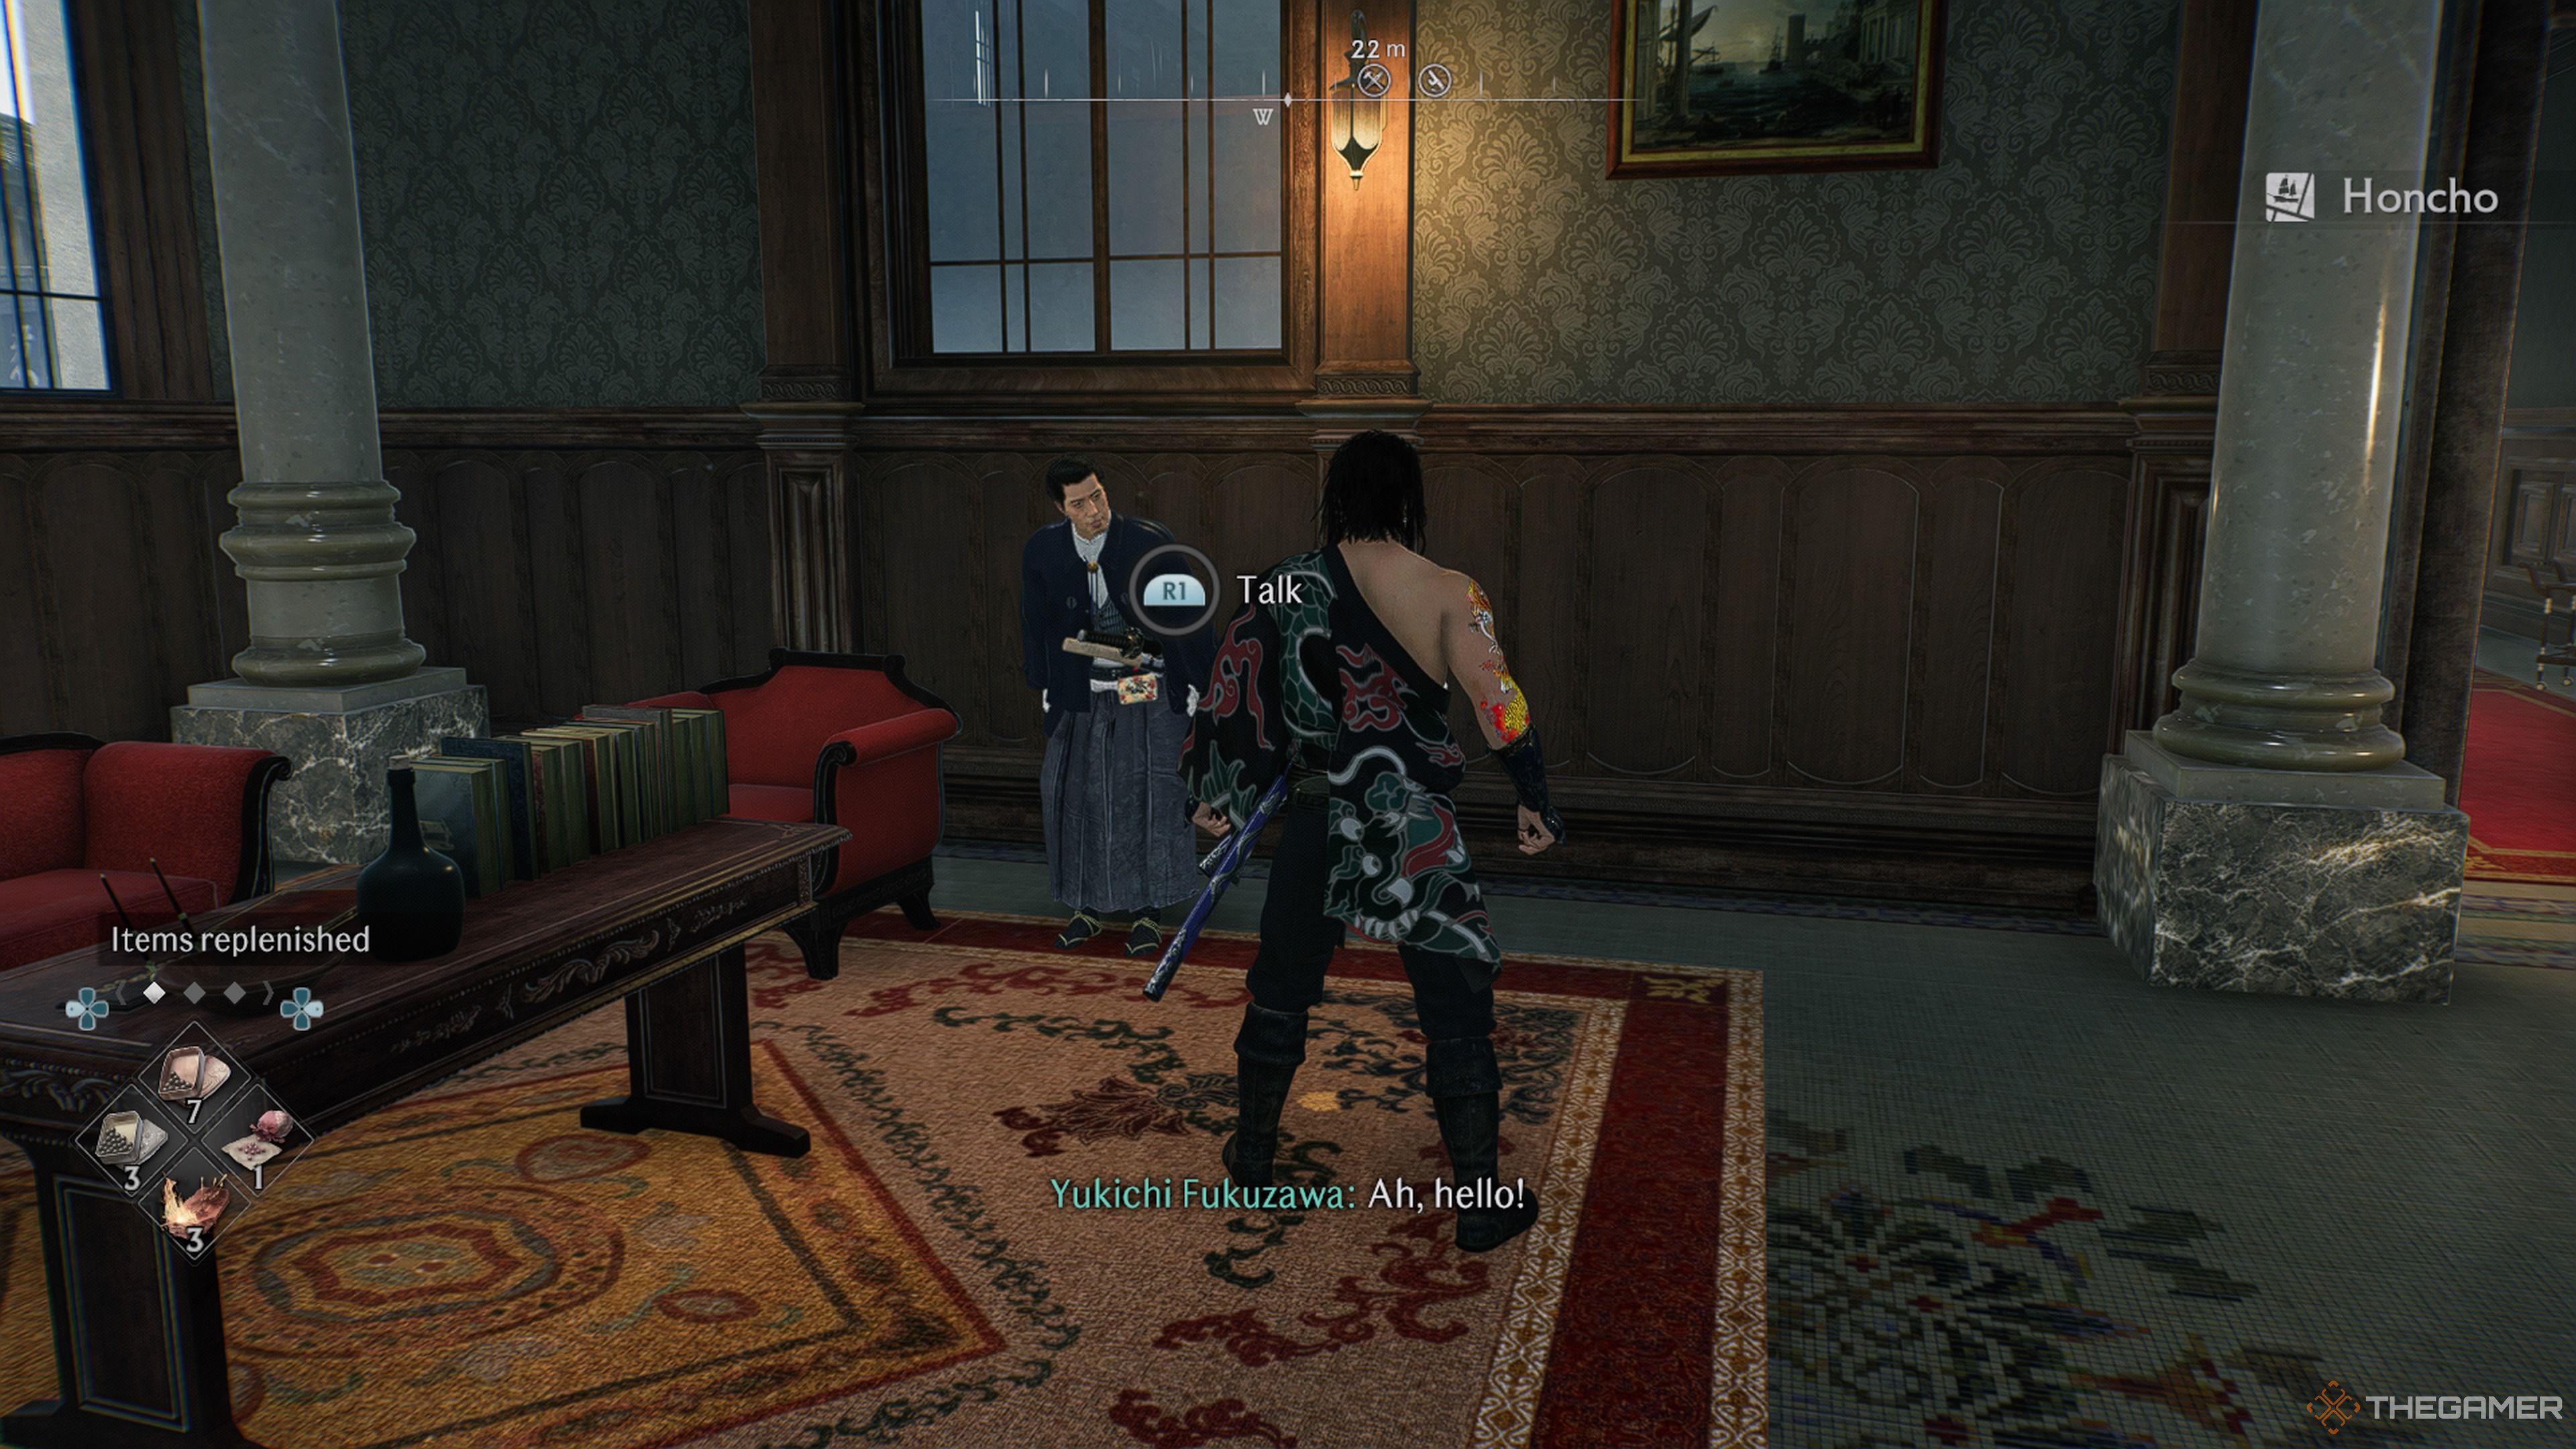 Yukichi bows to the protagonist inside the lobby of the Yokohama Grand Villa in Rise Of The Ronin.